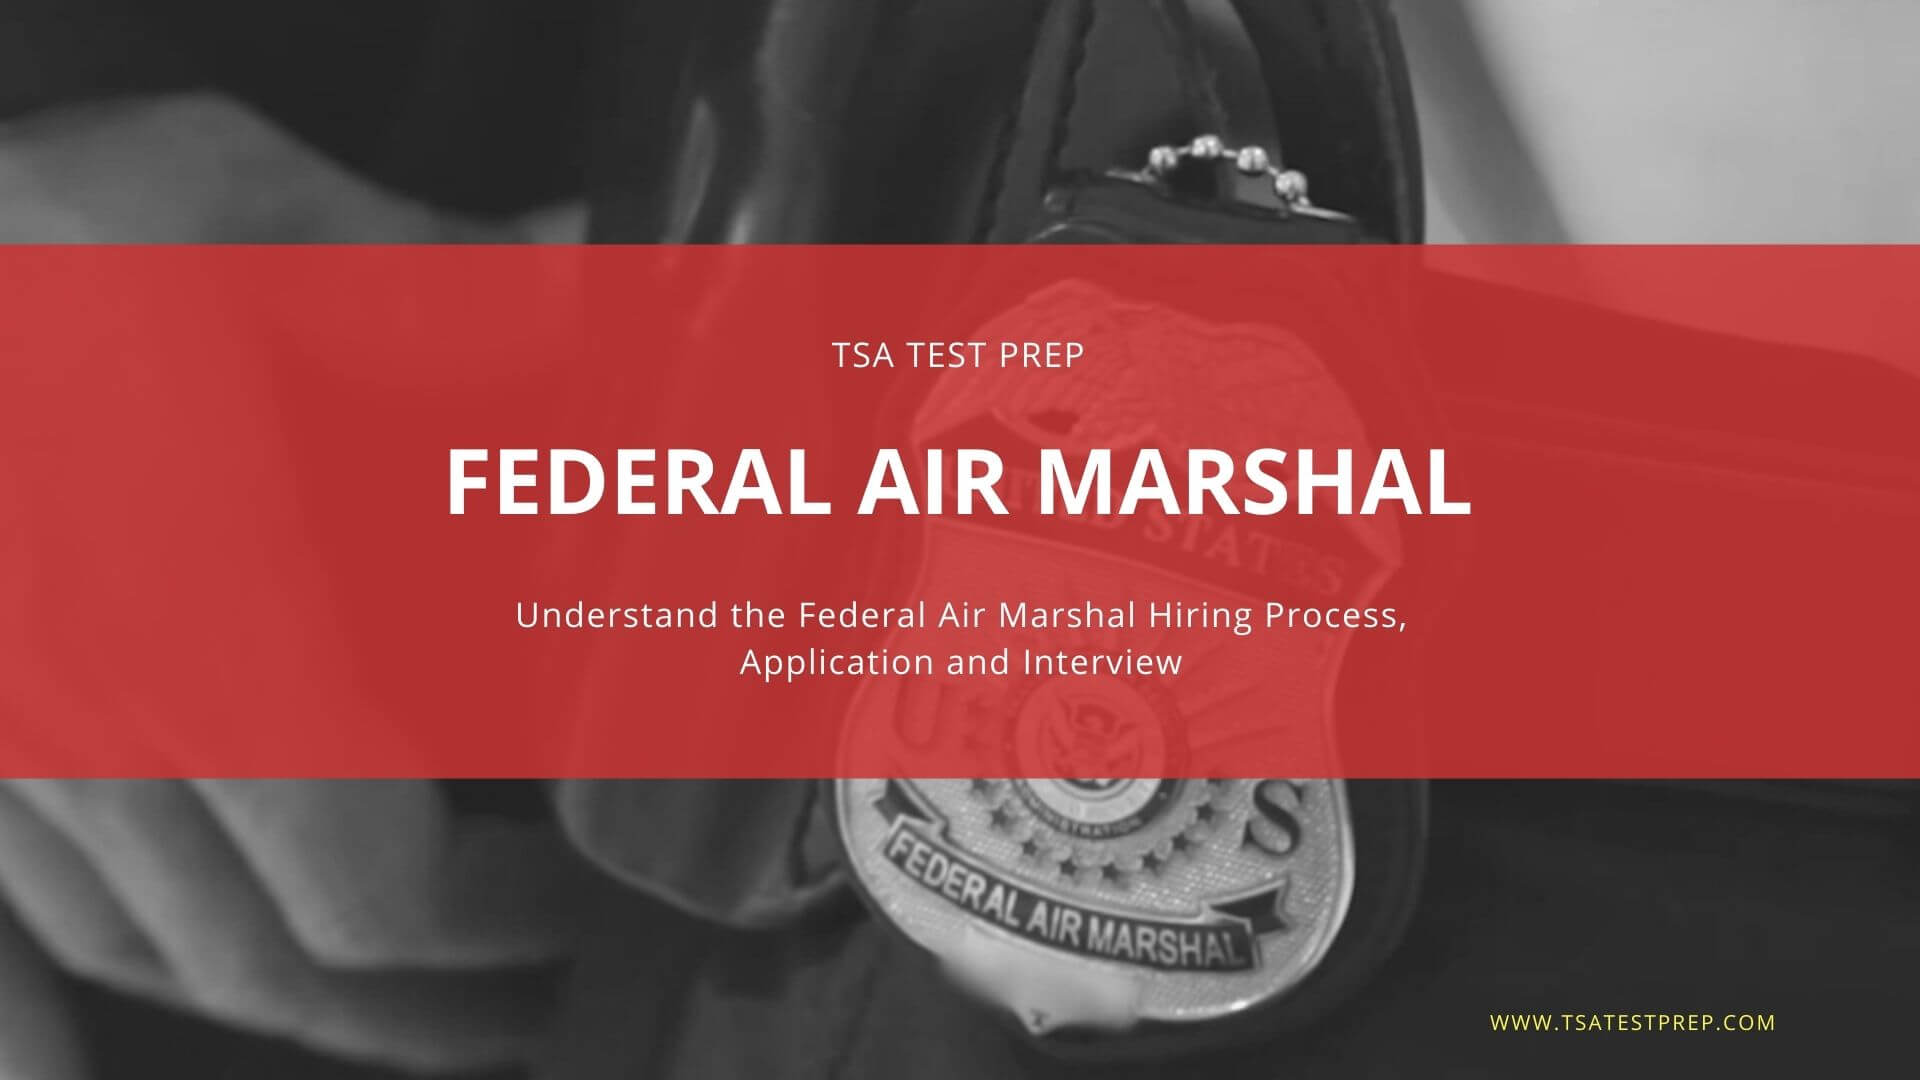 Federal Air Marshal Service and Law Enforcement Hiring Process